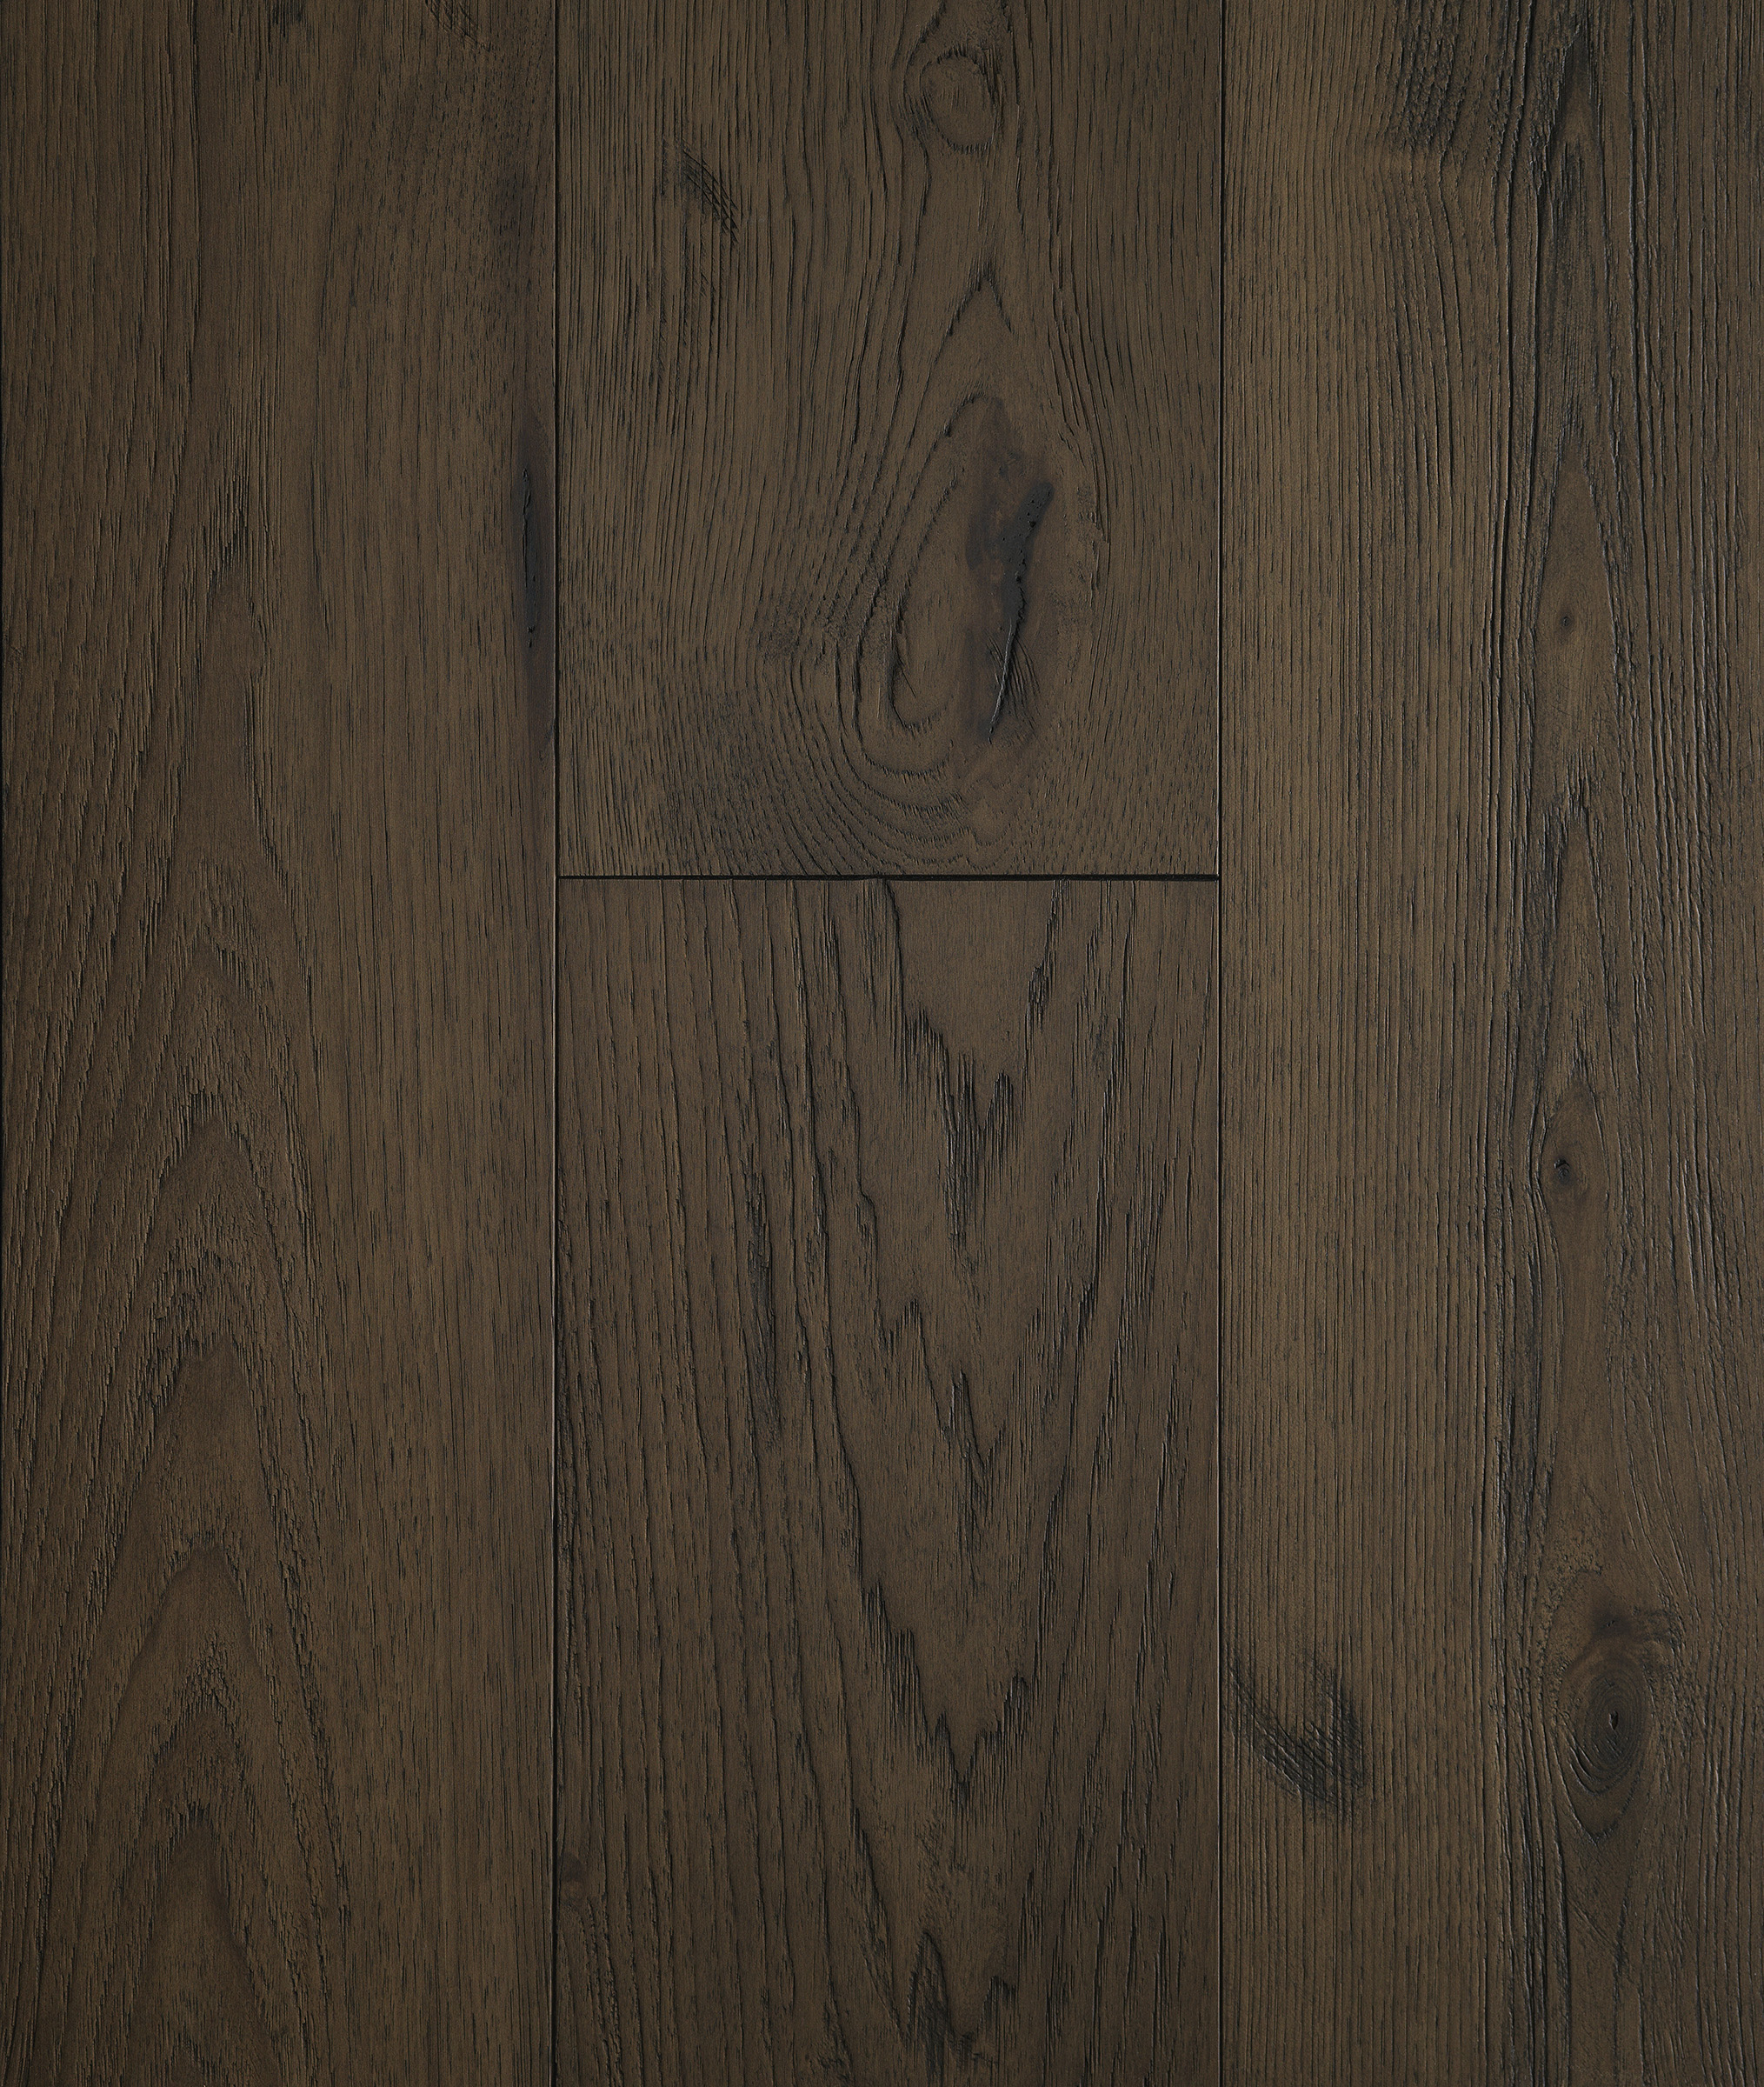 Lifecore Hardwoods Arden Hickory Collection, Distressed Brown Hickory Hardwood Flooring